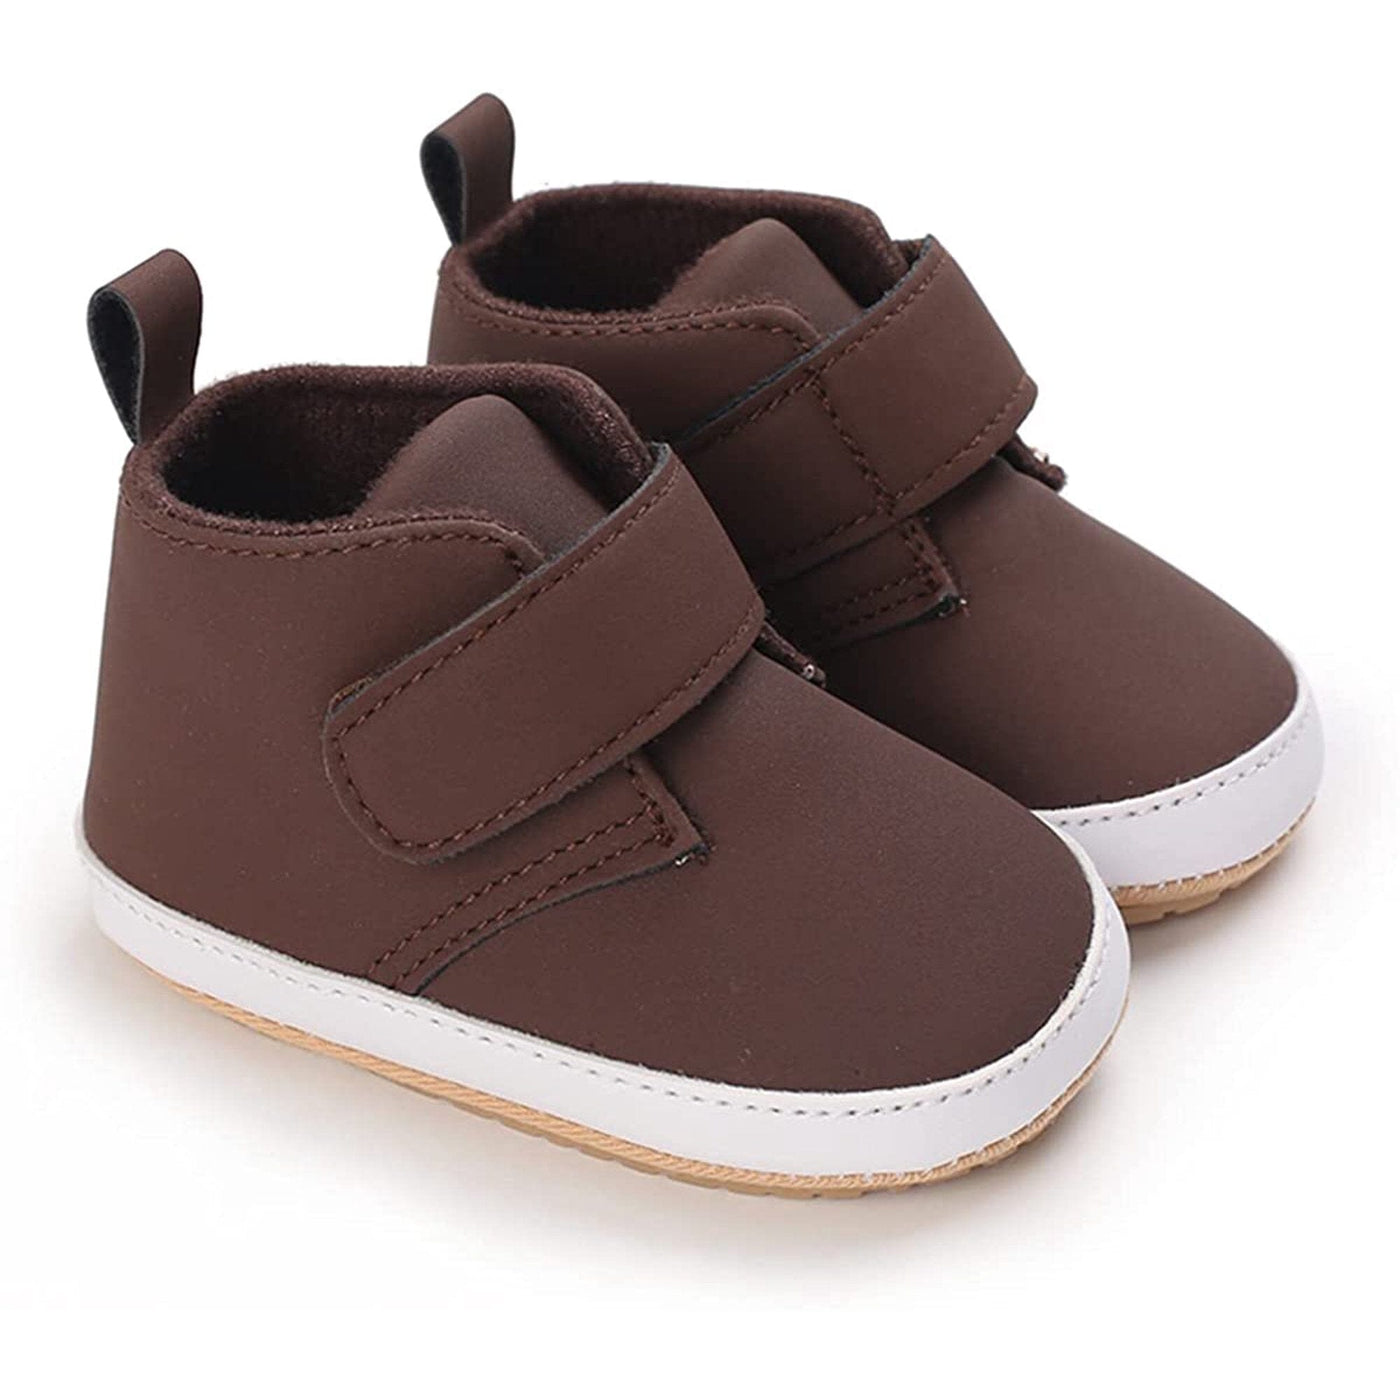 Baby Boy Moccasins Sneakers Shoes Iluvlittlepeople 6-9 Month Brown Out Sole Rubber